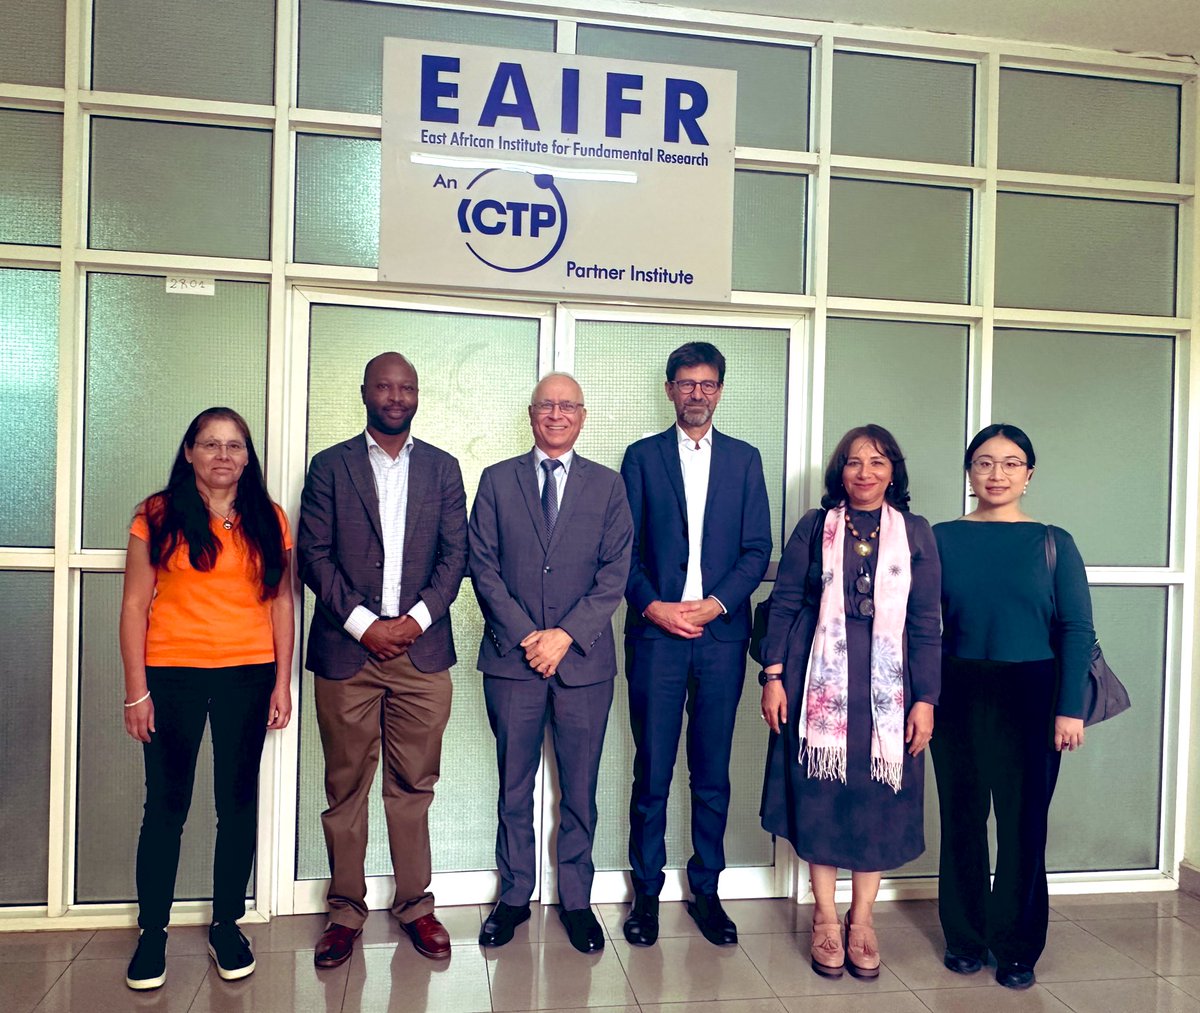 Taking opportunity of my participation to the @_AfricanUnion Reforme Retreat in Kigali, I visited the the East Africa institute Fundamental Research. I Met Dr. Omolulu Akin-Ojo Director @ictpeaifr, @SandroScandolo from @ictpnews & @amalkasry @UNESCO. Discussed Coop. with AUC/PAU